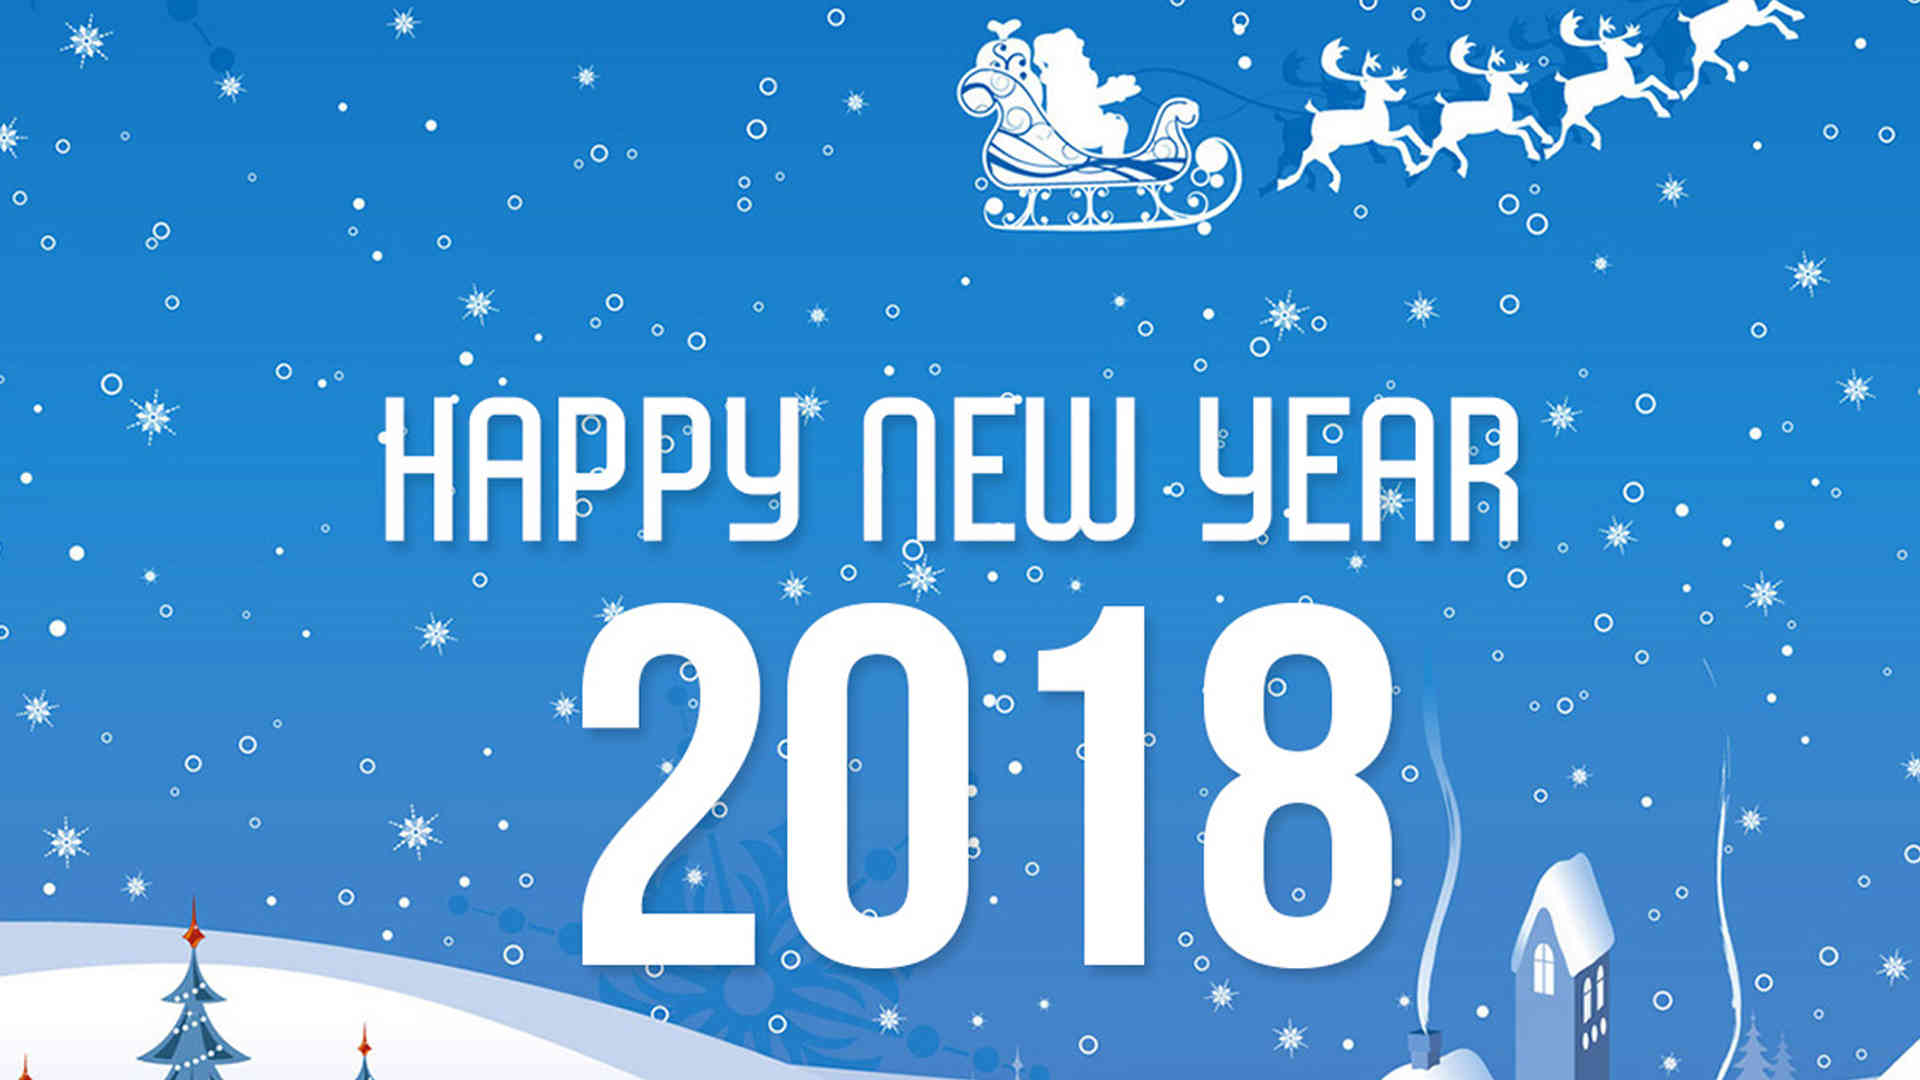 Happy New Year 2018 Wallpaper New Year HD Wallpapers Images